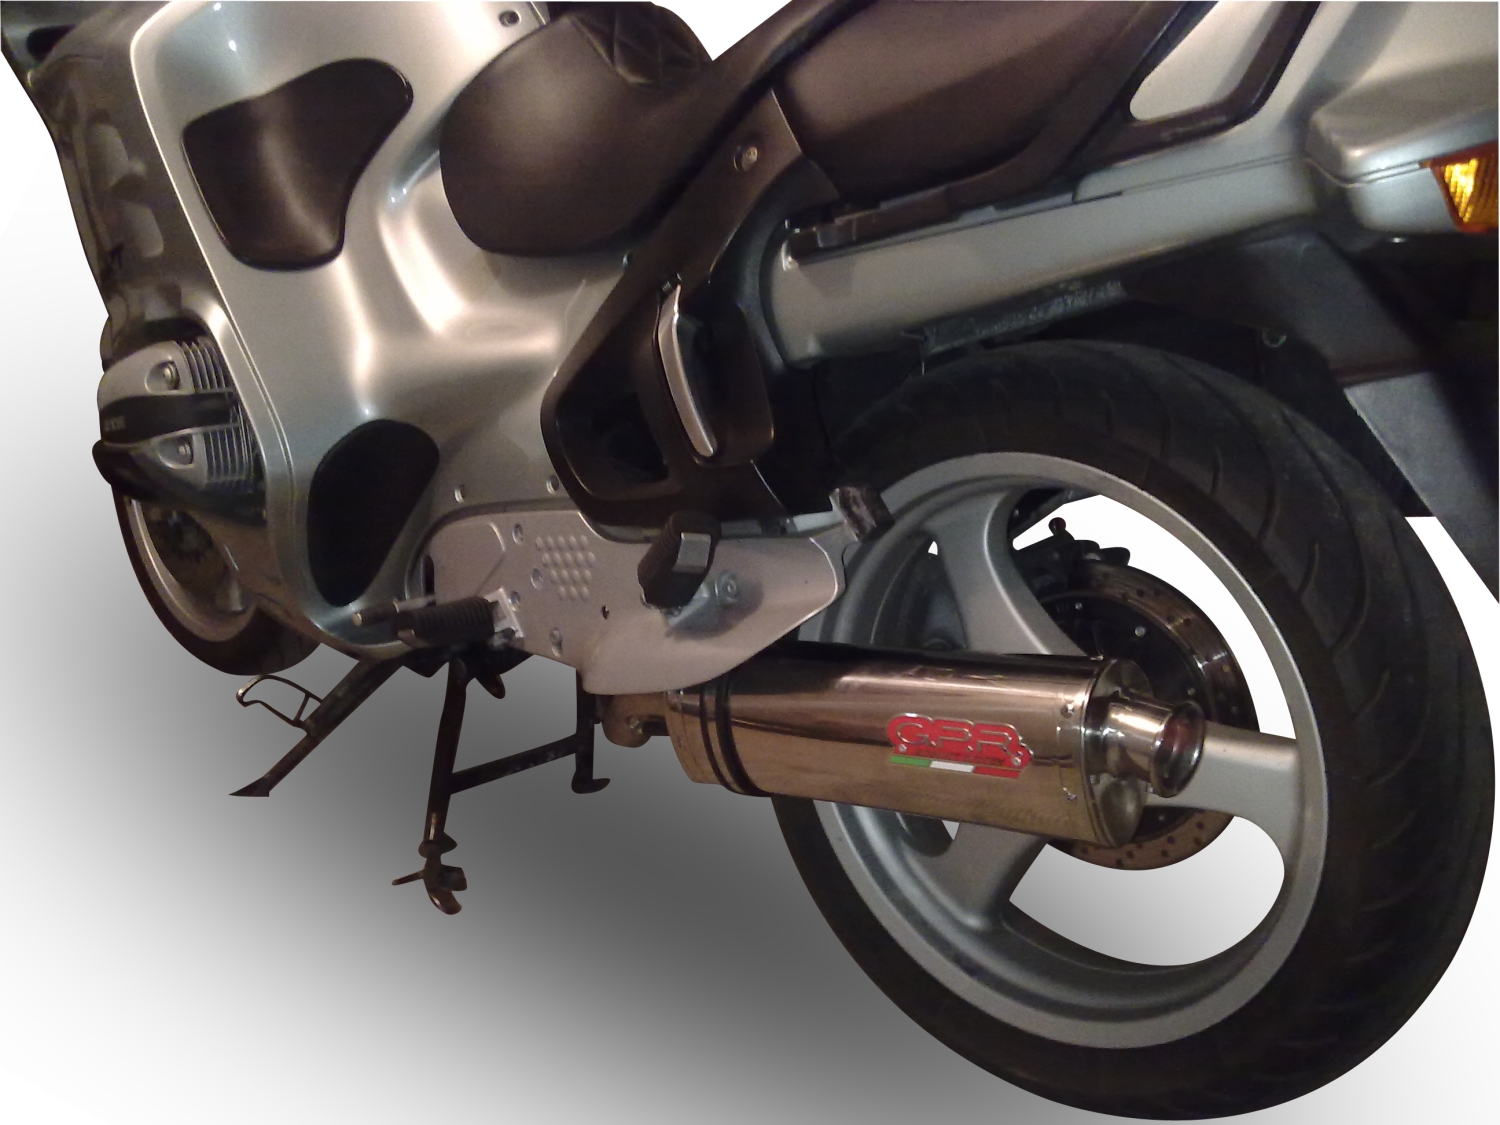 Exhaust system compatible with Bmw R 1100 Rt 1994-2001, Trioval, Homologated legal slip-on exhaust including removable db killer and link pipe 